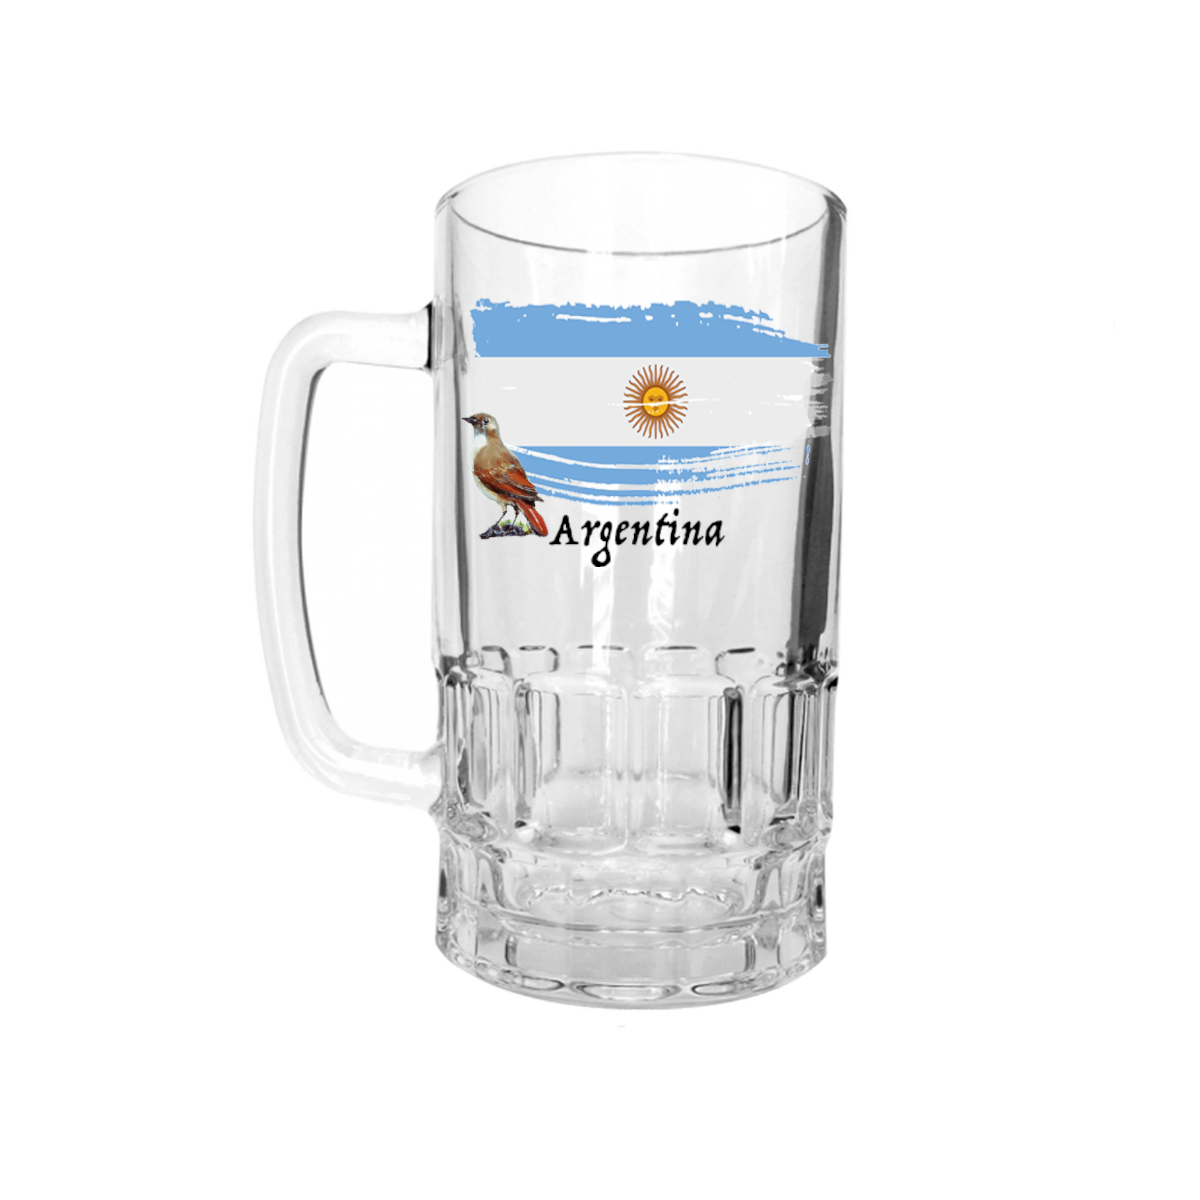 AGAD Turista (Country National Animal & Flag) 16oz Clear Glass Beer Stein